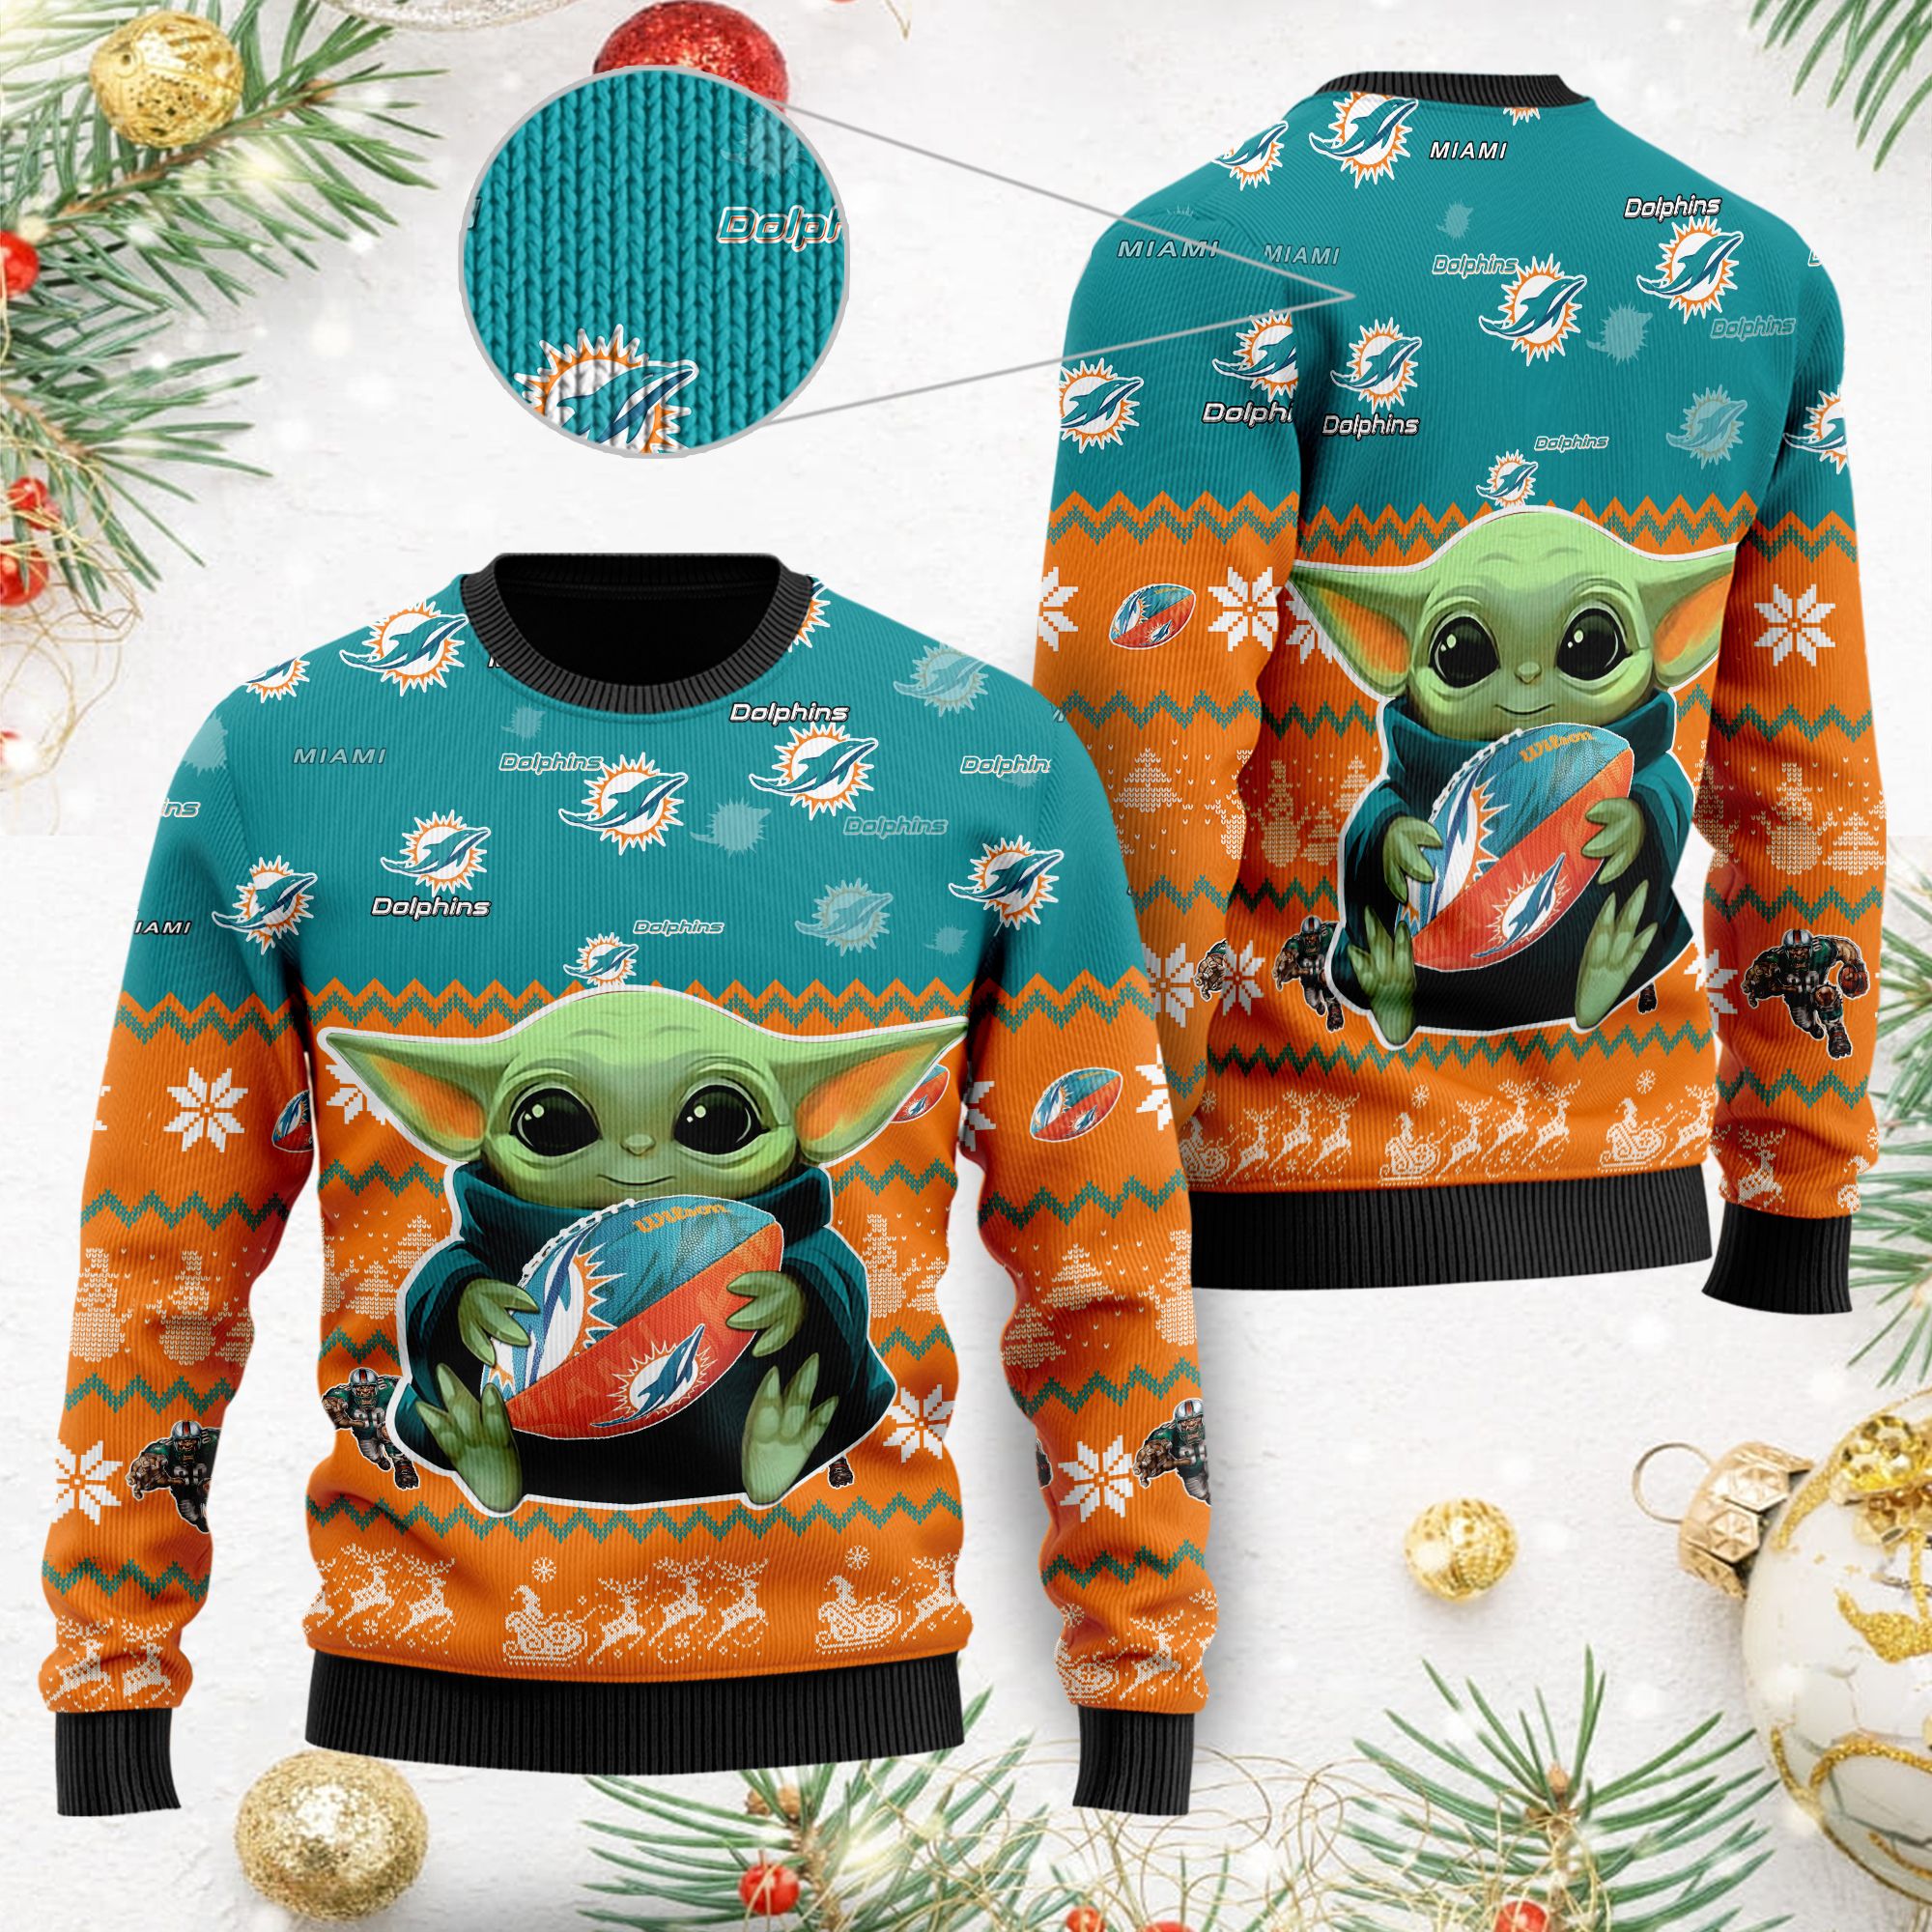 Miami Dolphins Shop - nfl miami dolphins sweater baby yoda shirt for american football fans ugly christmas40360